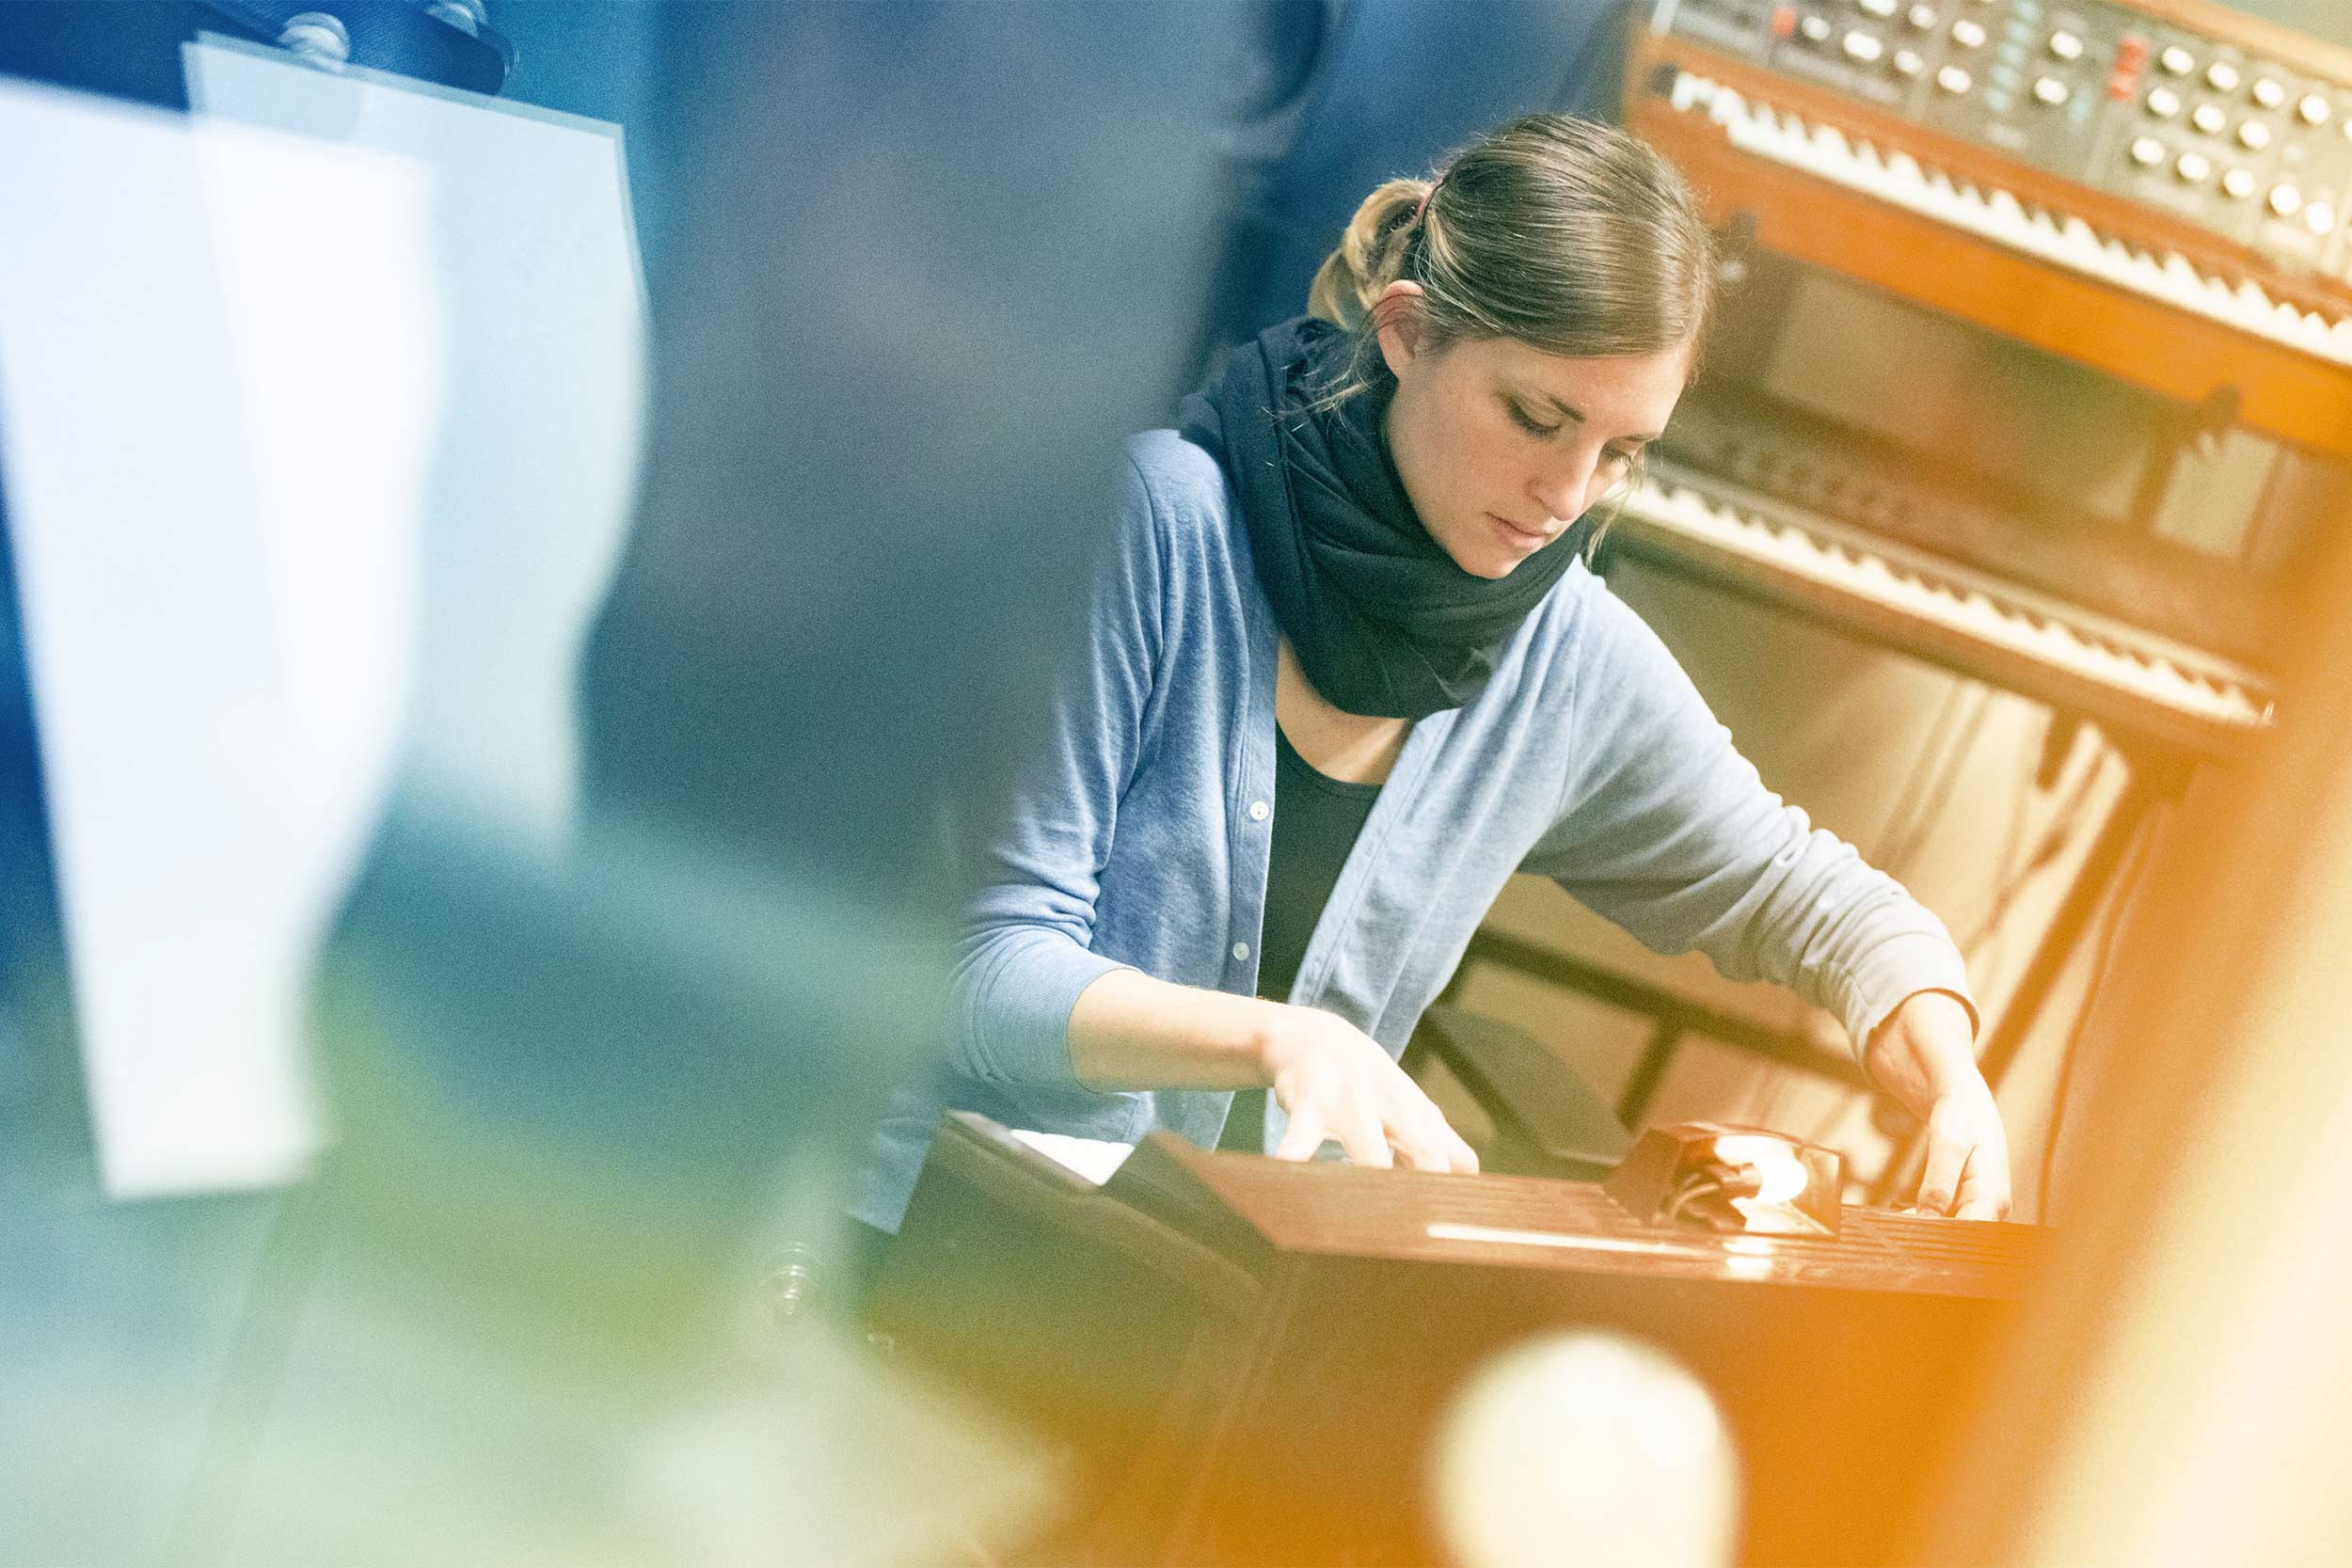 Molly Joyce has found an instrument that enables her to embrace her disability, a vintage electric toy organ. (Photos by Sanjay Suchak, University Communications)